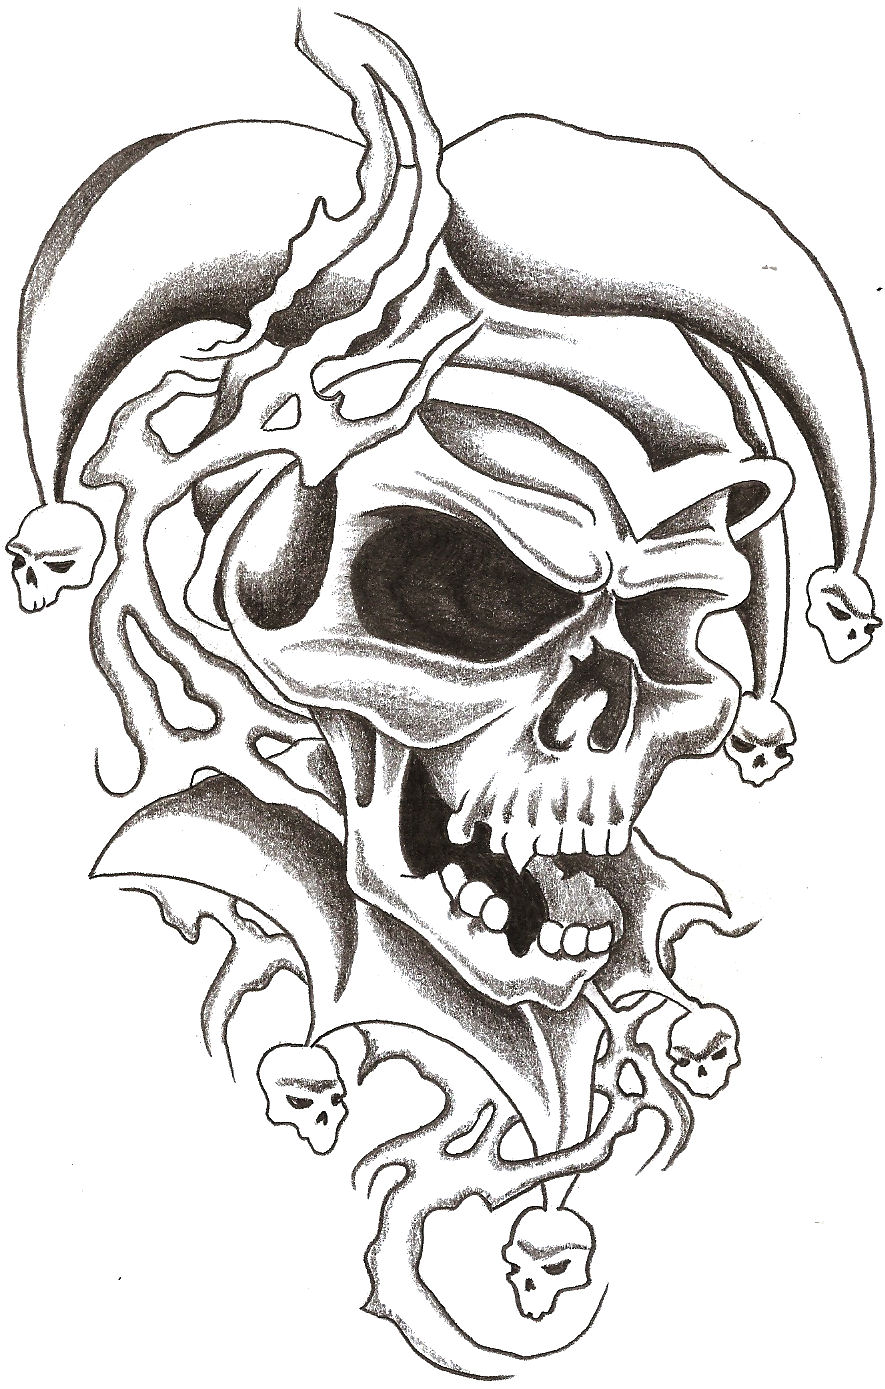 Wicked 13 Tattoodesigns